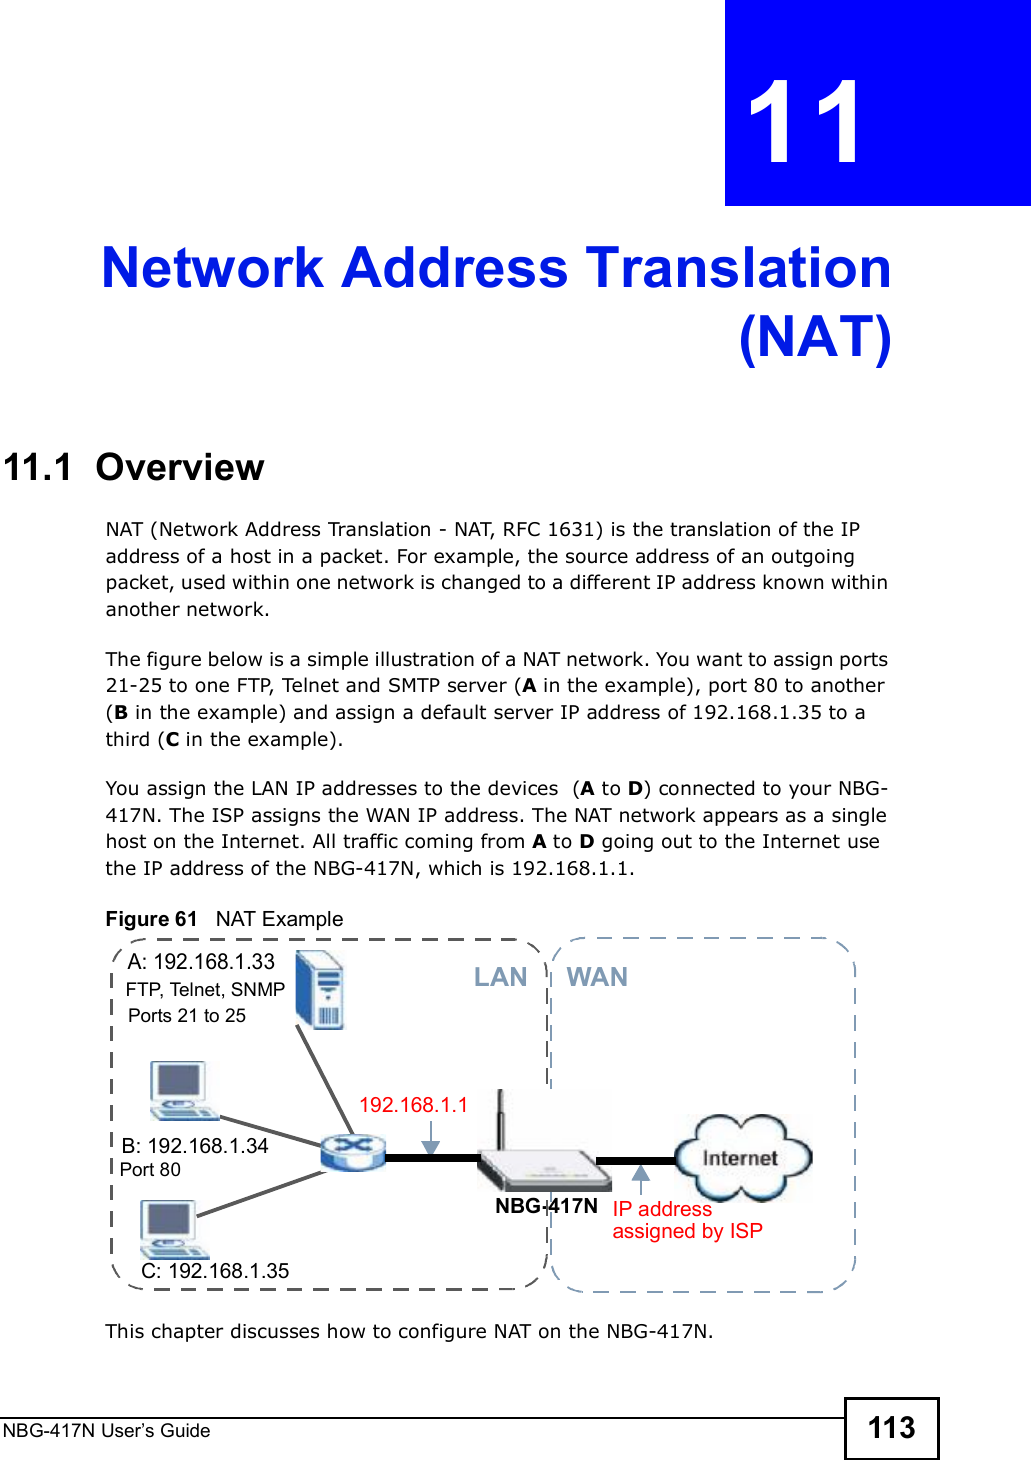 NBG-417N User s Guide 113CHAPTER  11 Network Address Translation(NAT)11.1  Overview   NAT (Network Address Translation - NAT, RFC 1631) is the translation of the IP address of a host in a packet. For example, the source address of an outgoing packet, used within one network is changed to a different IP address known within another network.The figure below is a simple illustration of a NAT network. You want to assign ports 21-25 to one FTP, Telnet and SMTP server (A in the example), port 80 to another (B in the example) and assign a default server IP address of 192.168.1.35 to a third (C in the example). You assign the LAN IP addresses to the devices  (A to D) connected to your NBG-417N. The ISP assigns the WAN IP address. The NAT network appears as a single host on the Internet. All traffic coming from A to D going out to the Internet use the IP address of the NBG-417N, which is 192.168.1.1.Figure 61   NAT ExampleThis chapter discusses how to configure NAT on the NBG-417N.A: 192.168.1.33B: 192.168.1.34C: 192.168.1.35IP address 192.168.1.1NBG-417NWANLANassigned by ISPFTP, Telnet, SNMPPort 80Ports 21 to 25